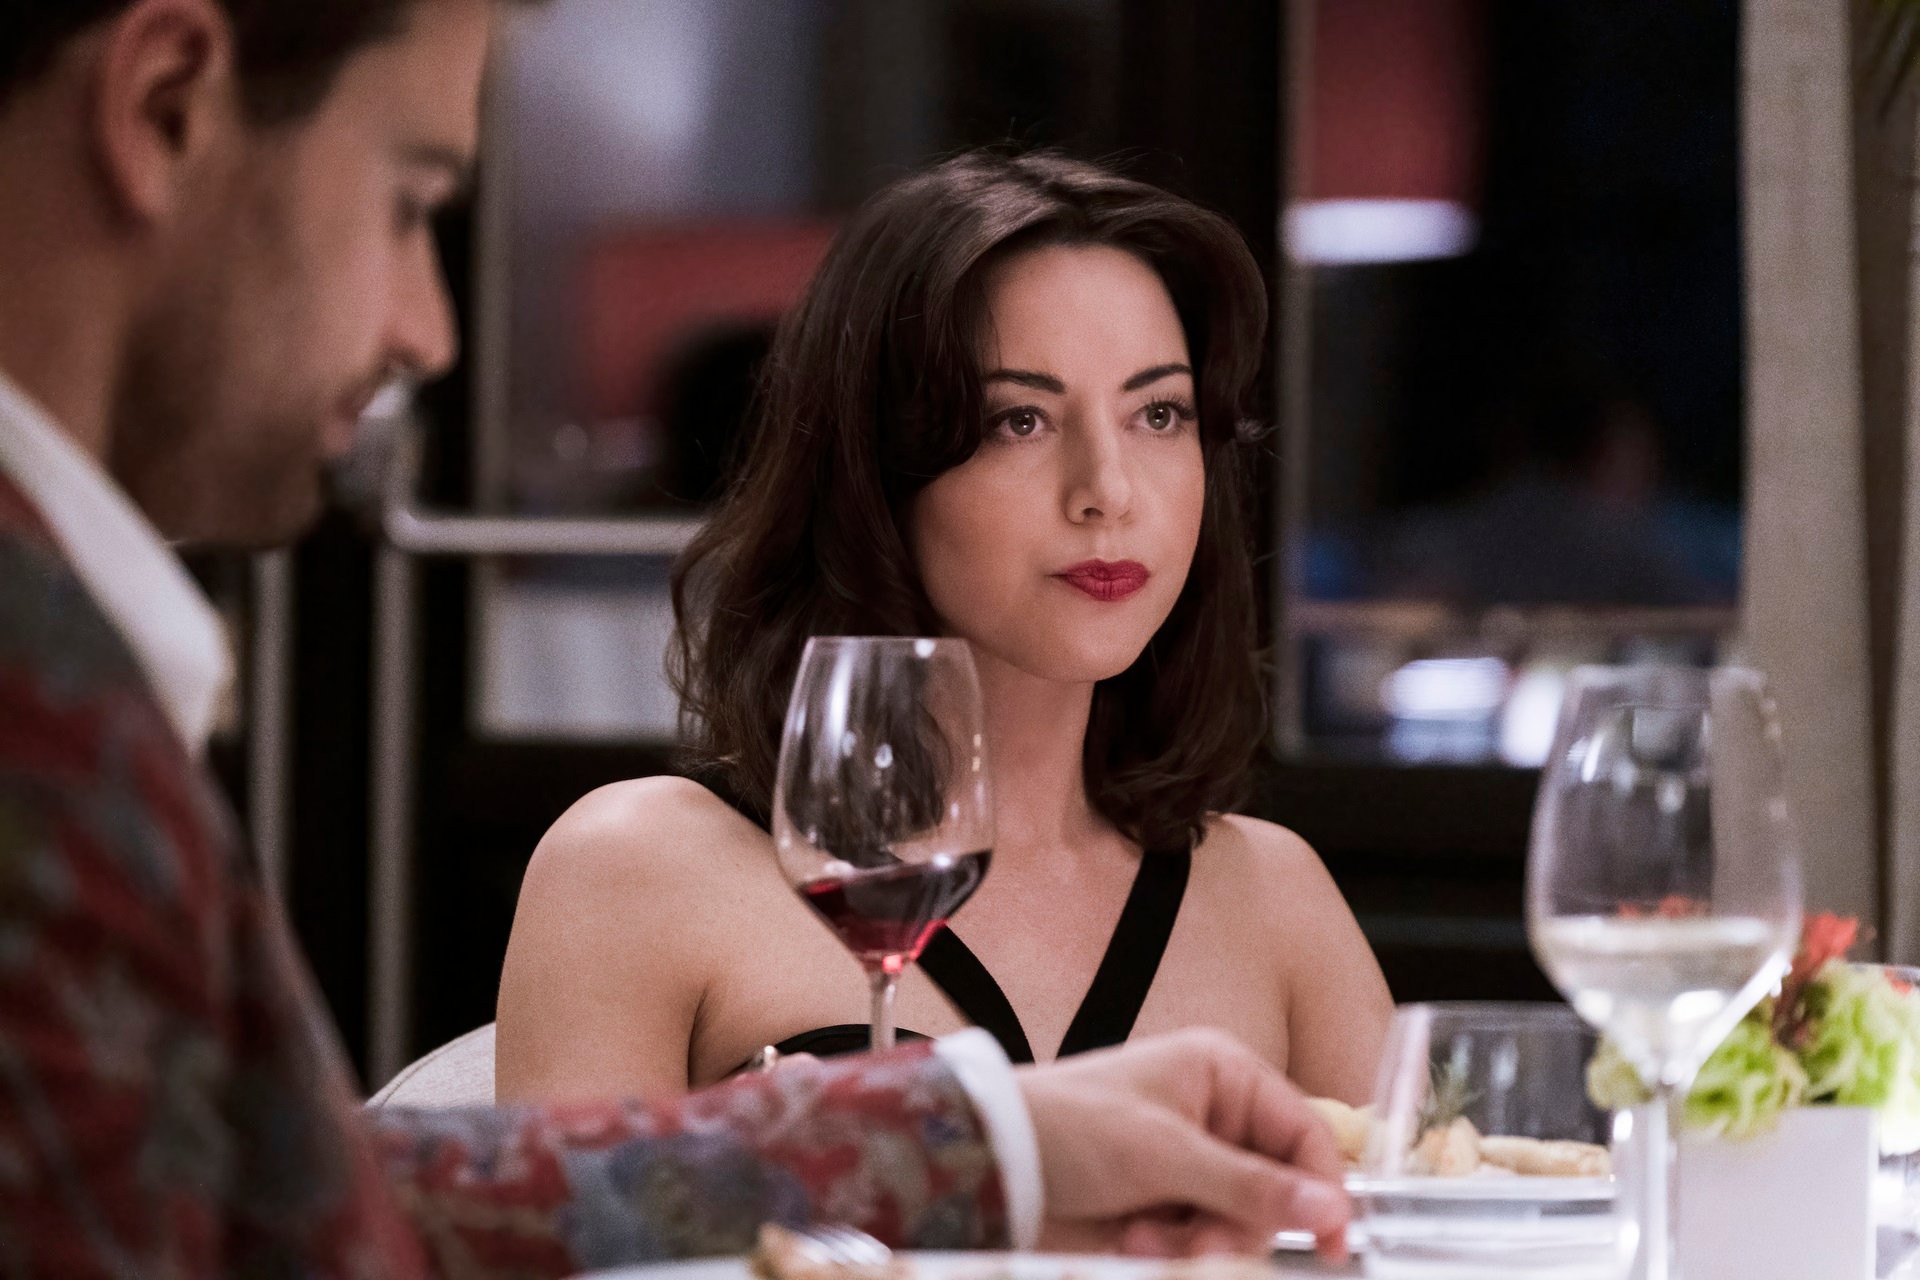 Aubrey Plaza as Harper Spiller in front of a glass of wine in 'The White Lotus: Sicily' Episode 1